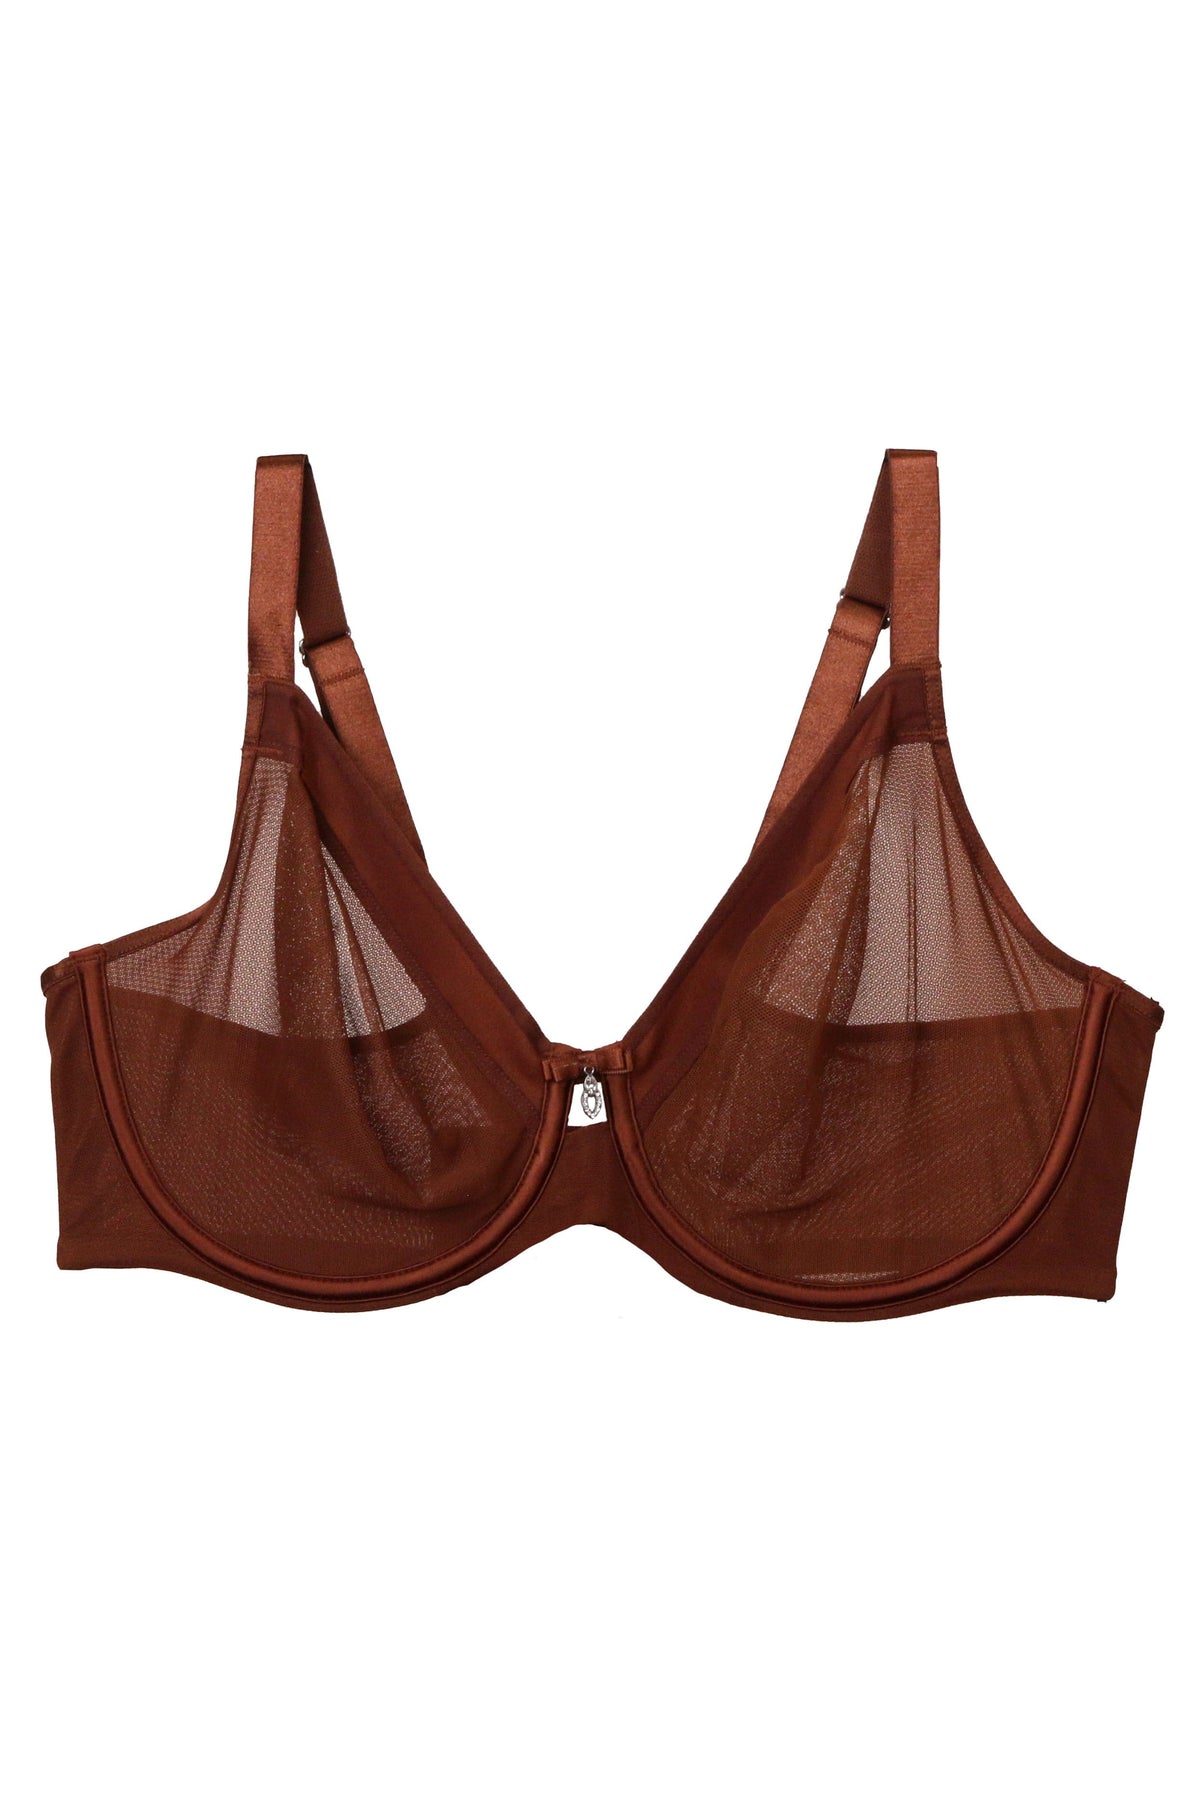 Curvy Couture Plunge Sheer Mesh Unlined Underwire Bra - Chocolate